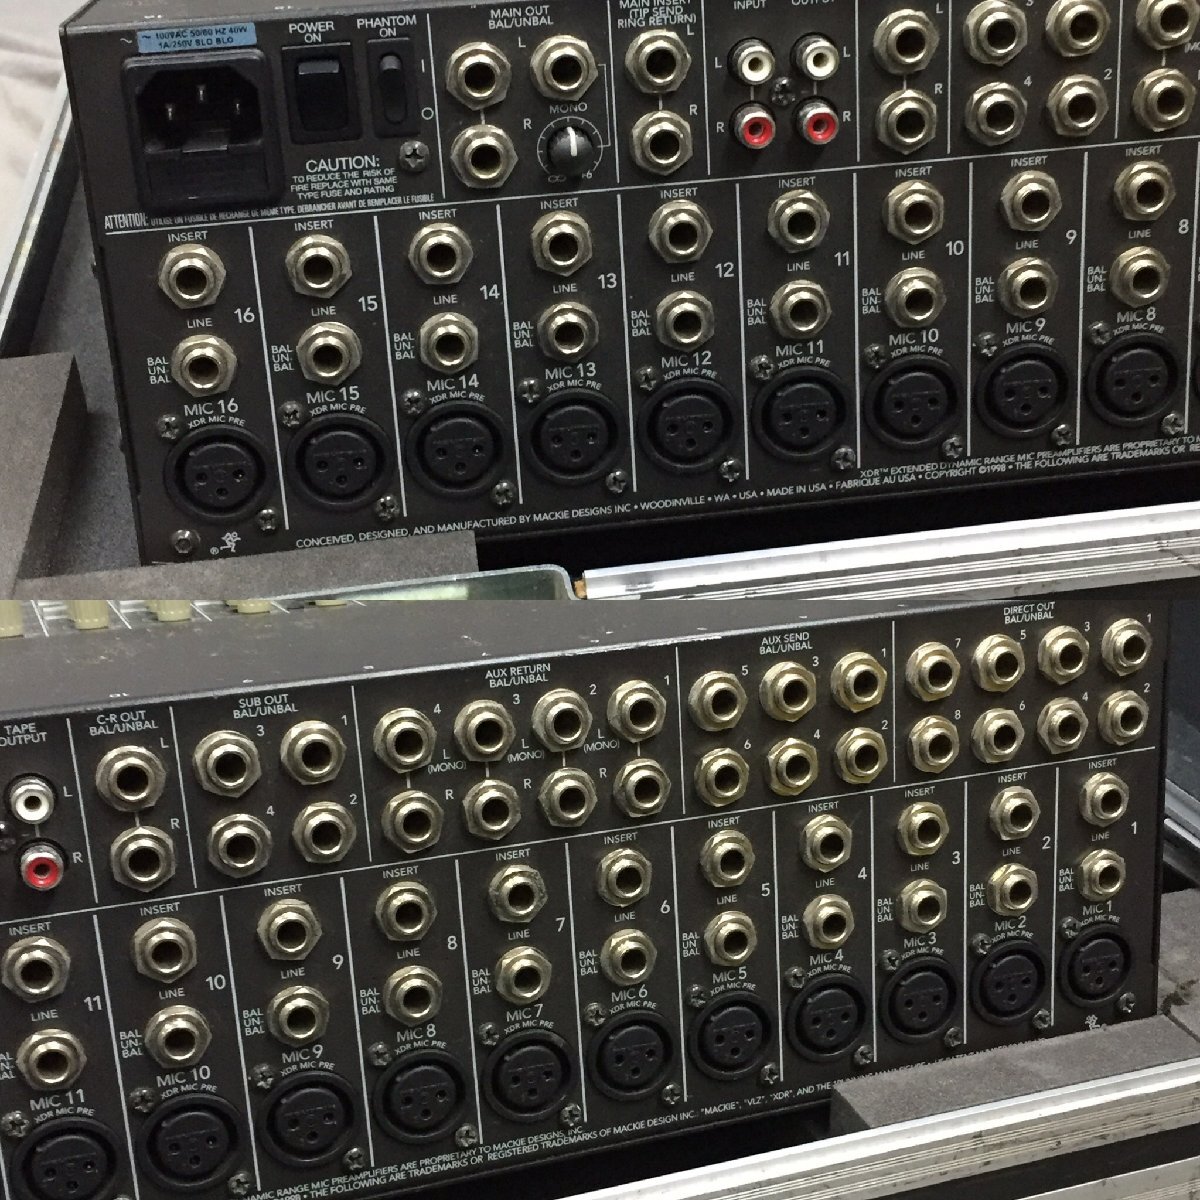 f146*160 [ present condition goods ] MACKIE 1604-VLZ PRO Mackie analog mixer hard case attaching 